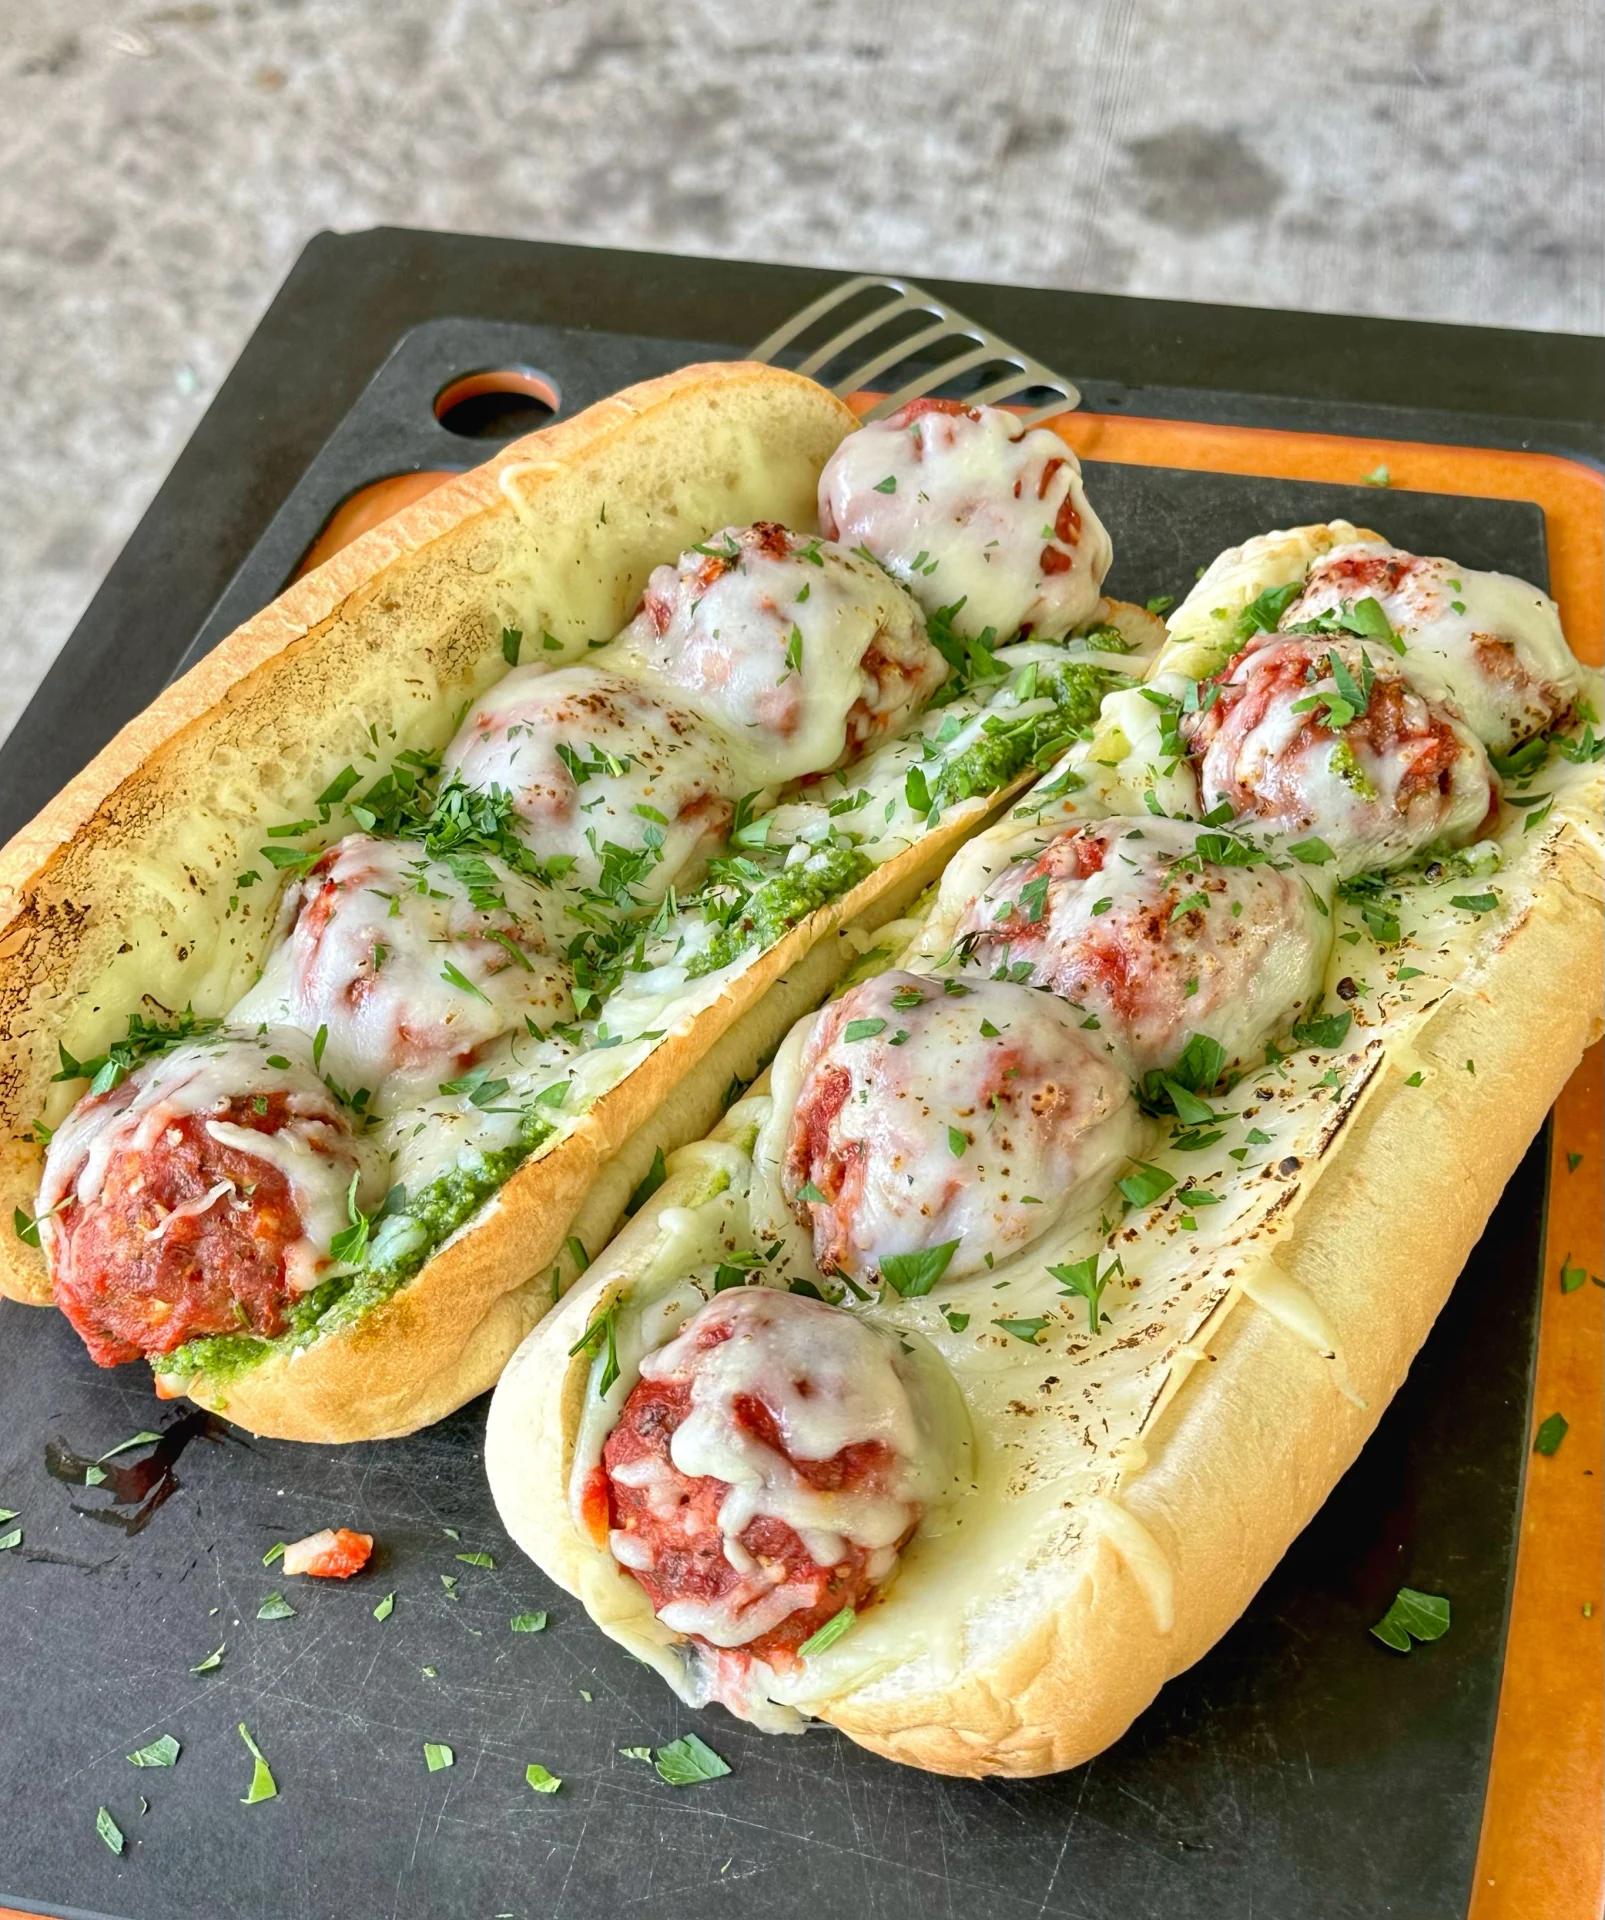 smoked meatball subs - What's in a Subway meatball sub